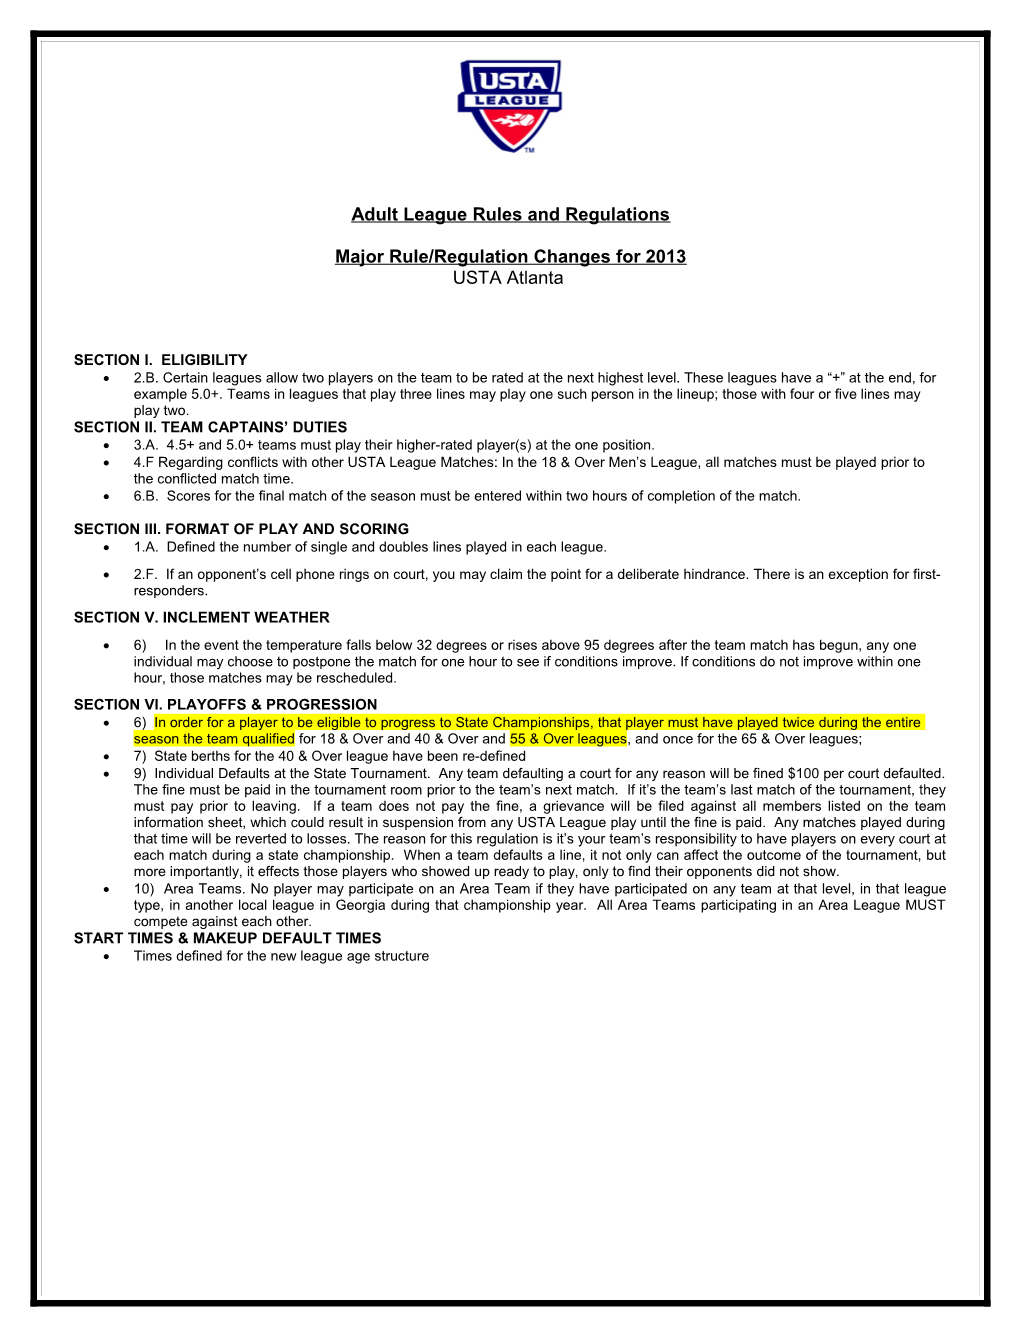 Adult League Rules and Regulations